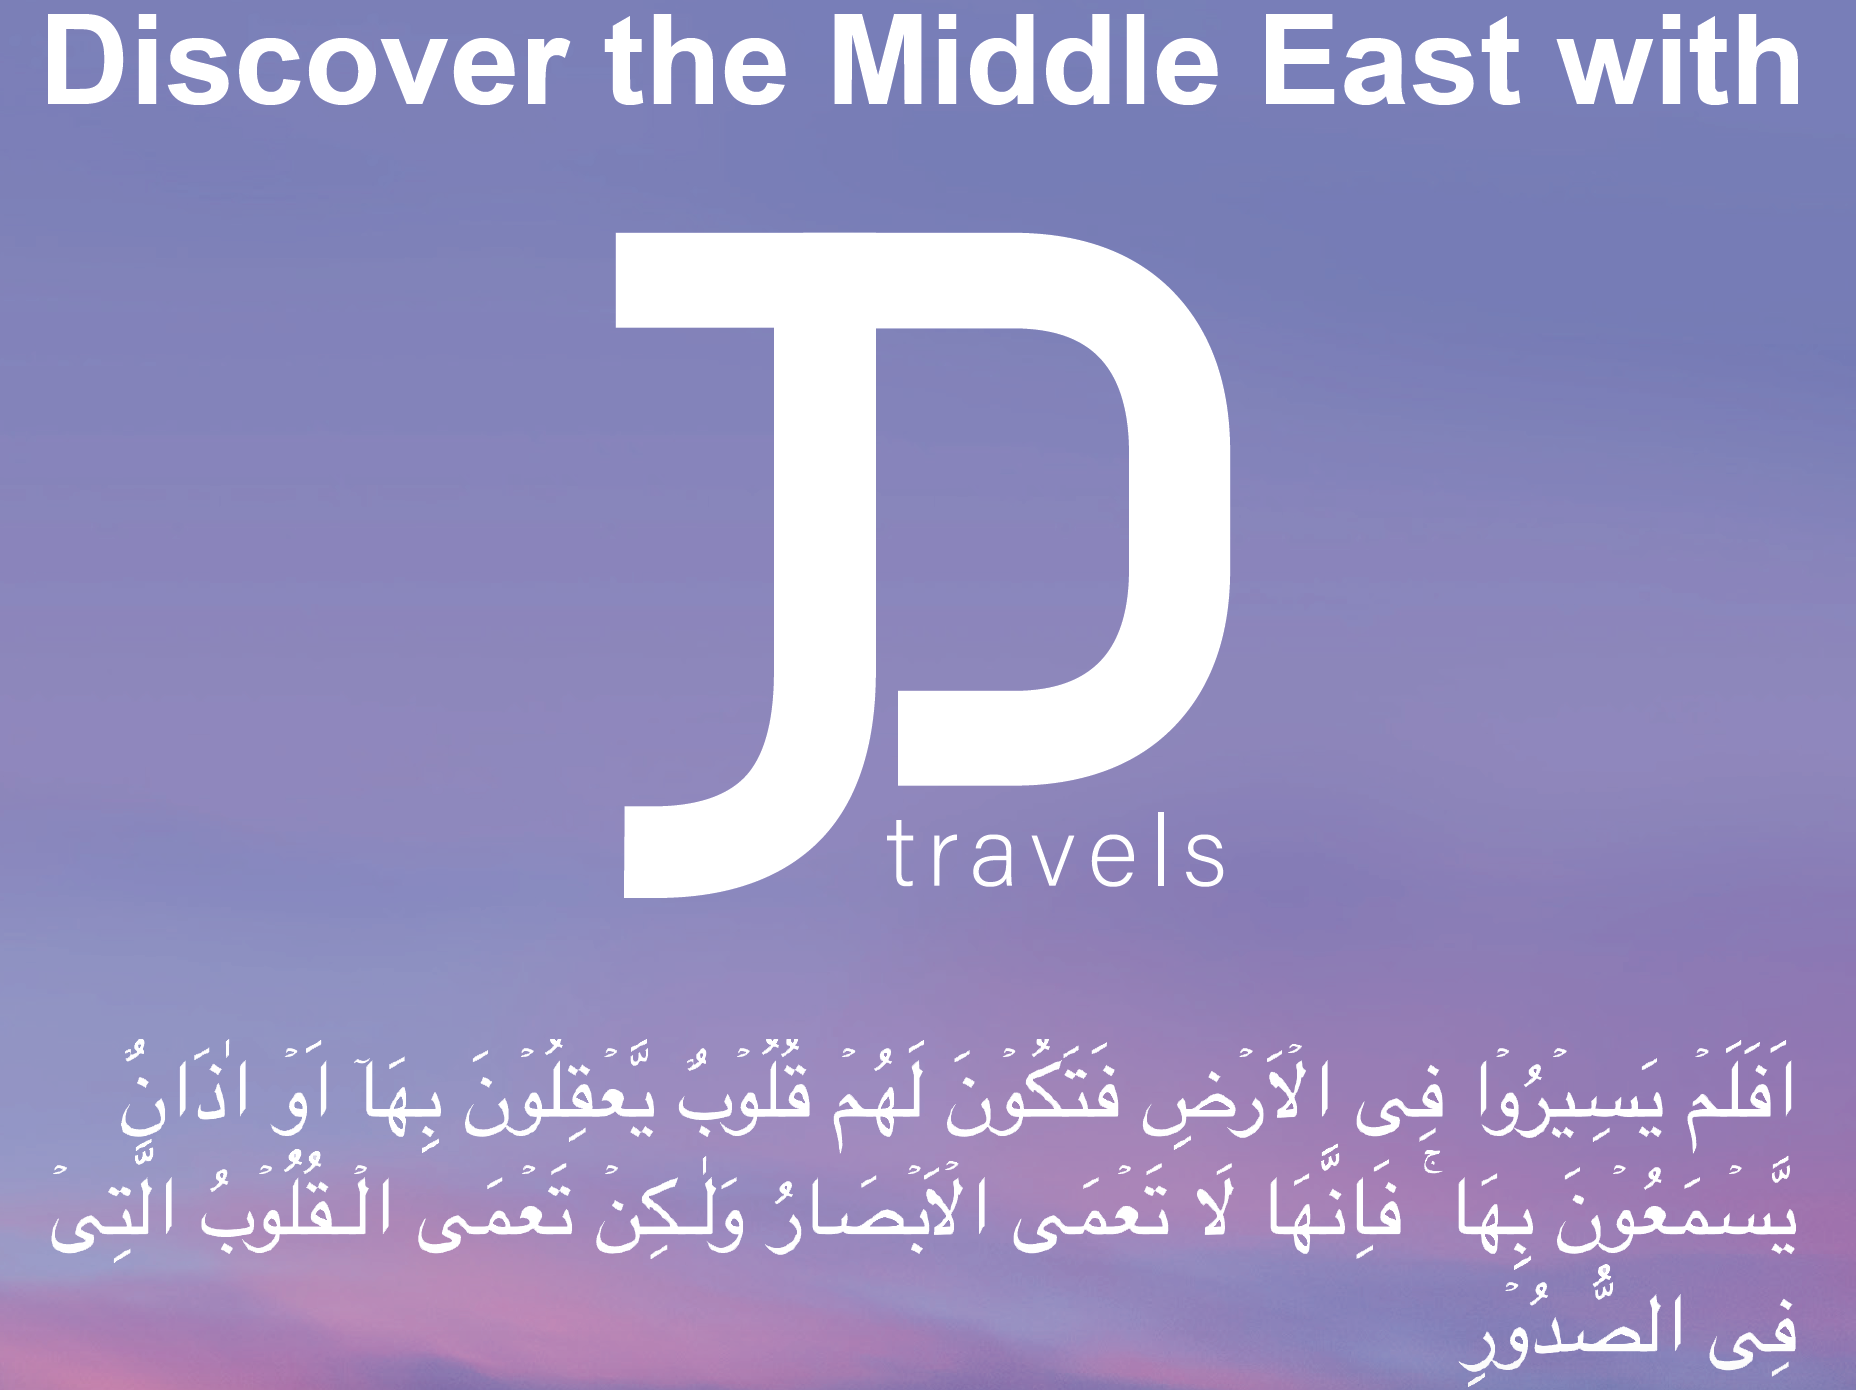 Download Our Middle East Tour Guide